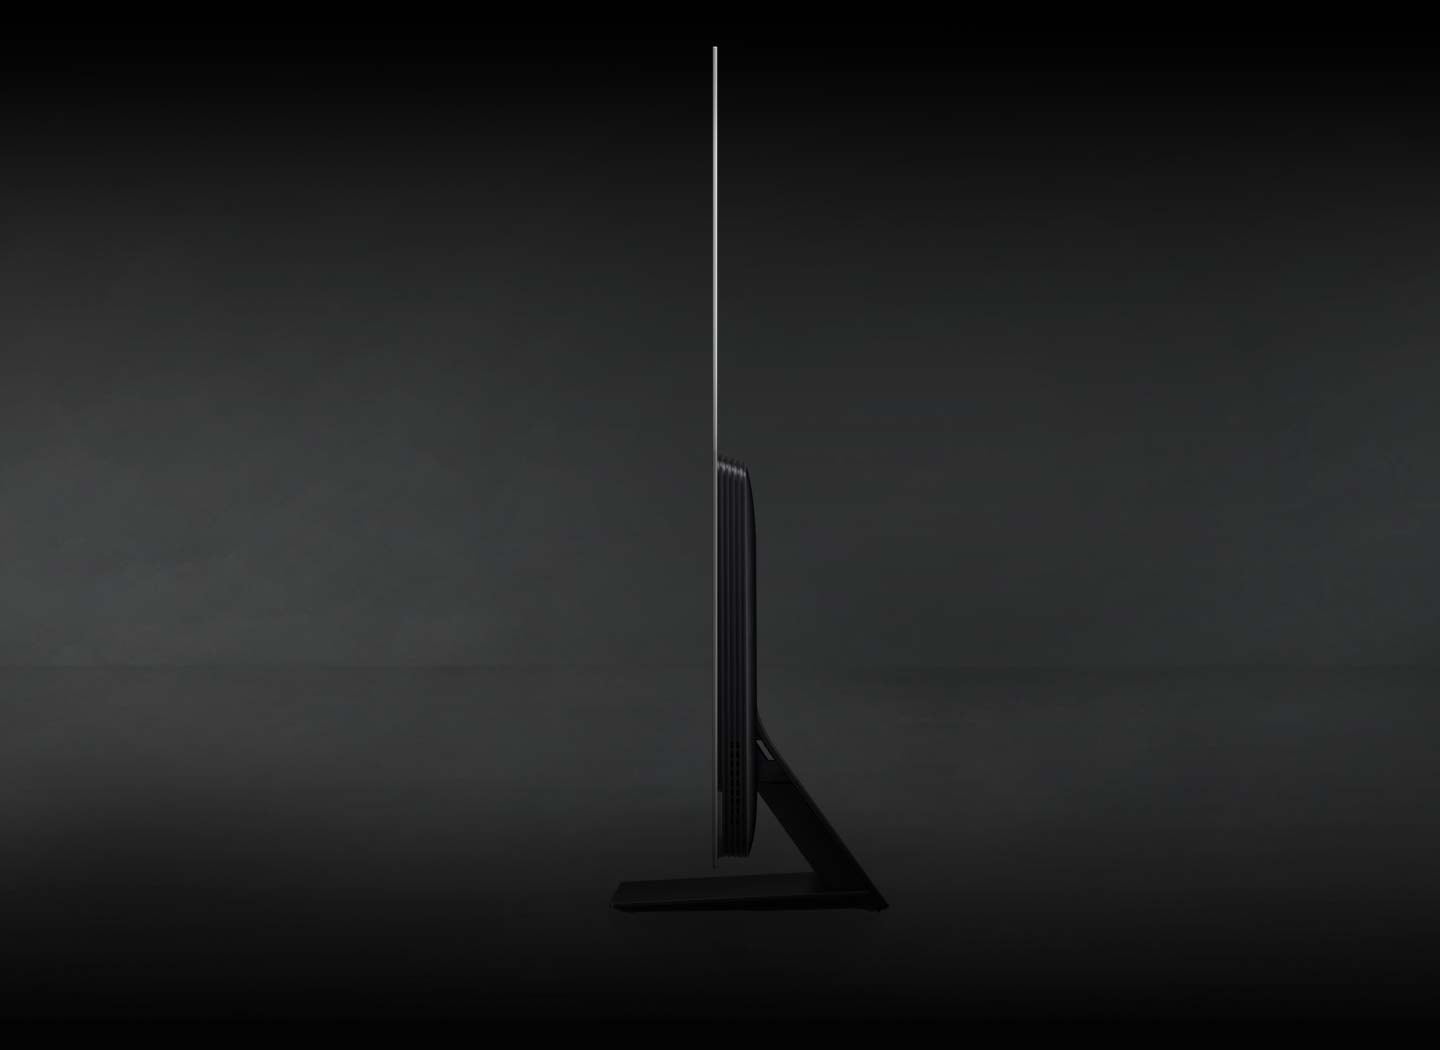 An OLED TV displaying nature flips sideways to show its laserslim design.